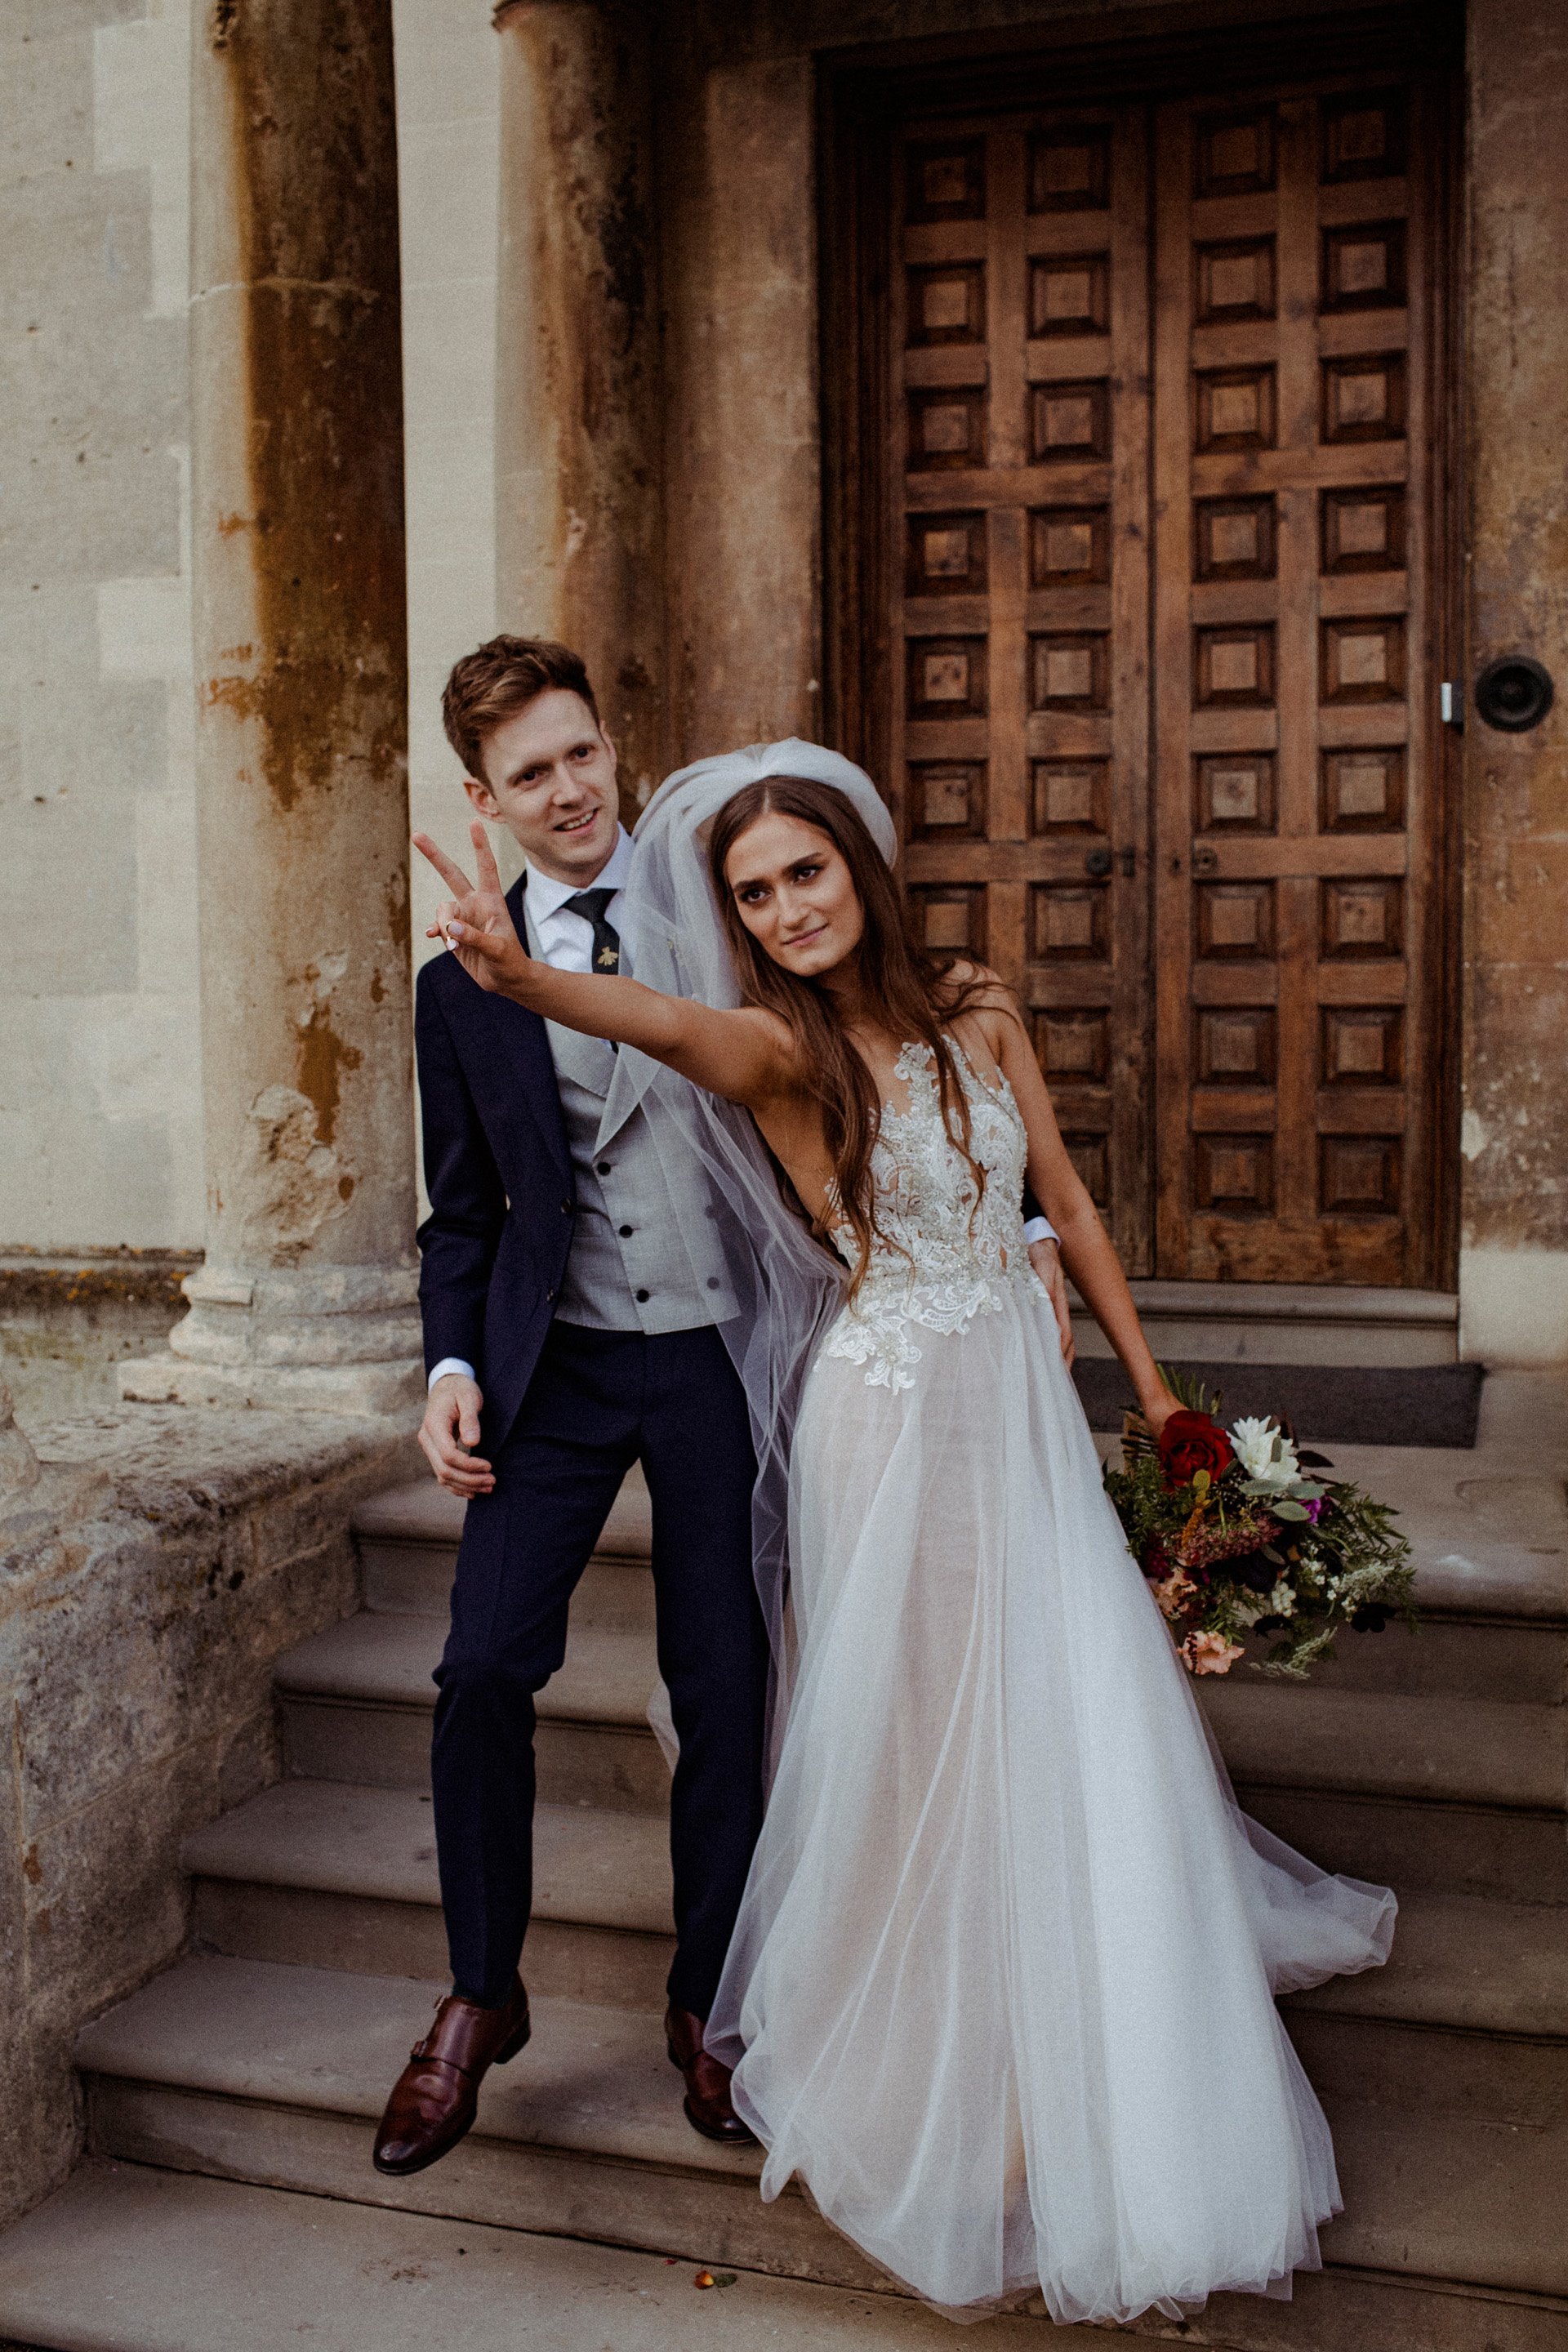 Cool Bride pulls v sign pose with groom outside their mansion house autumn wedding venue